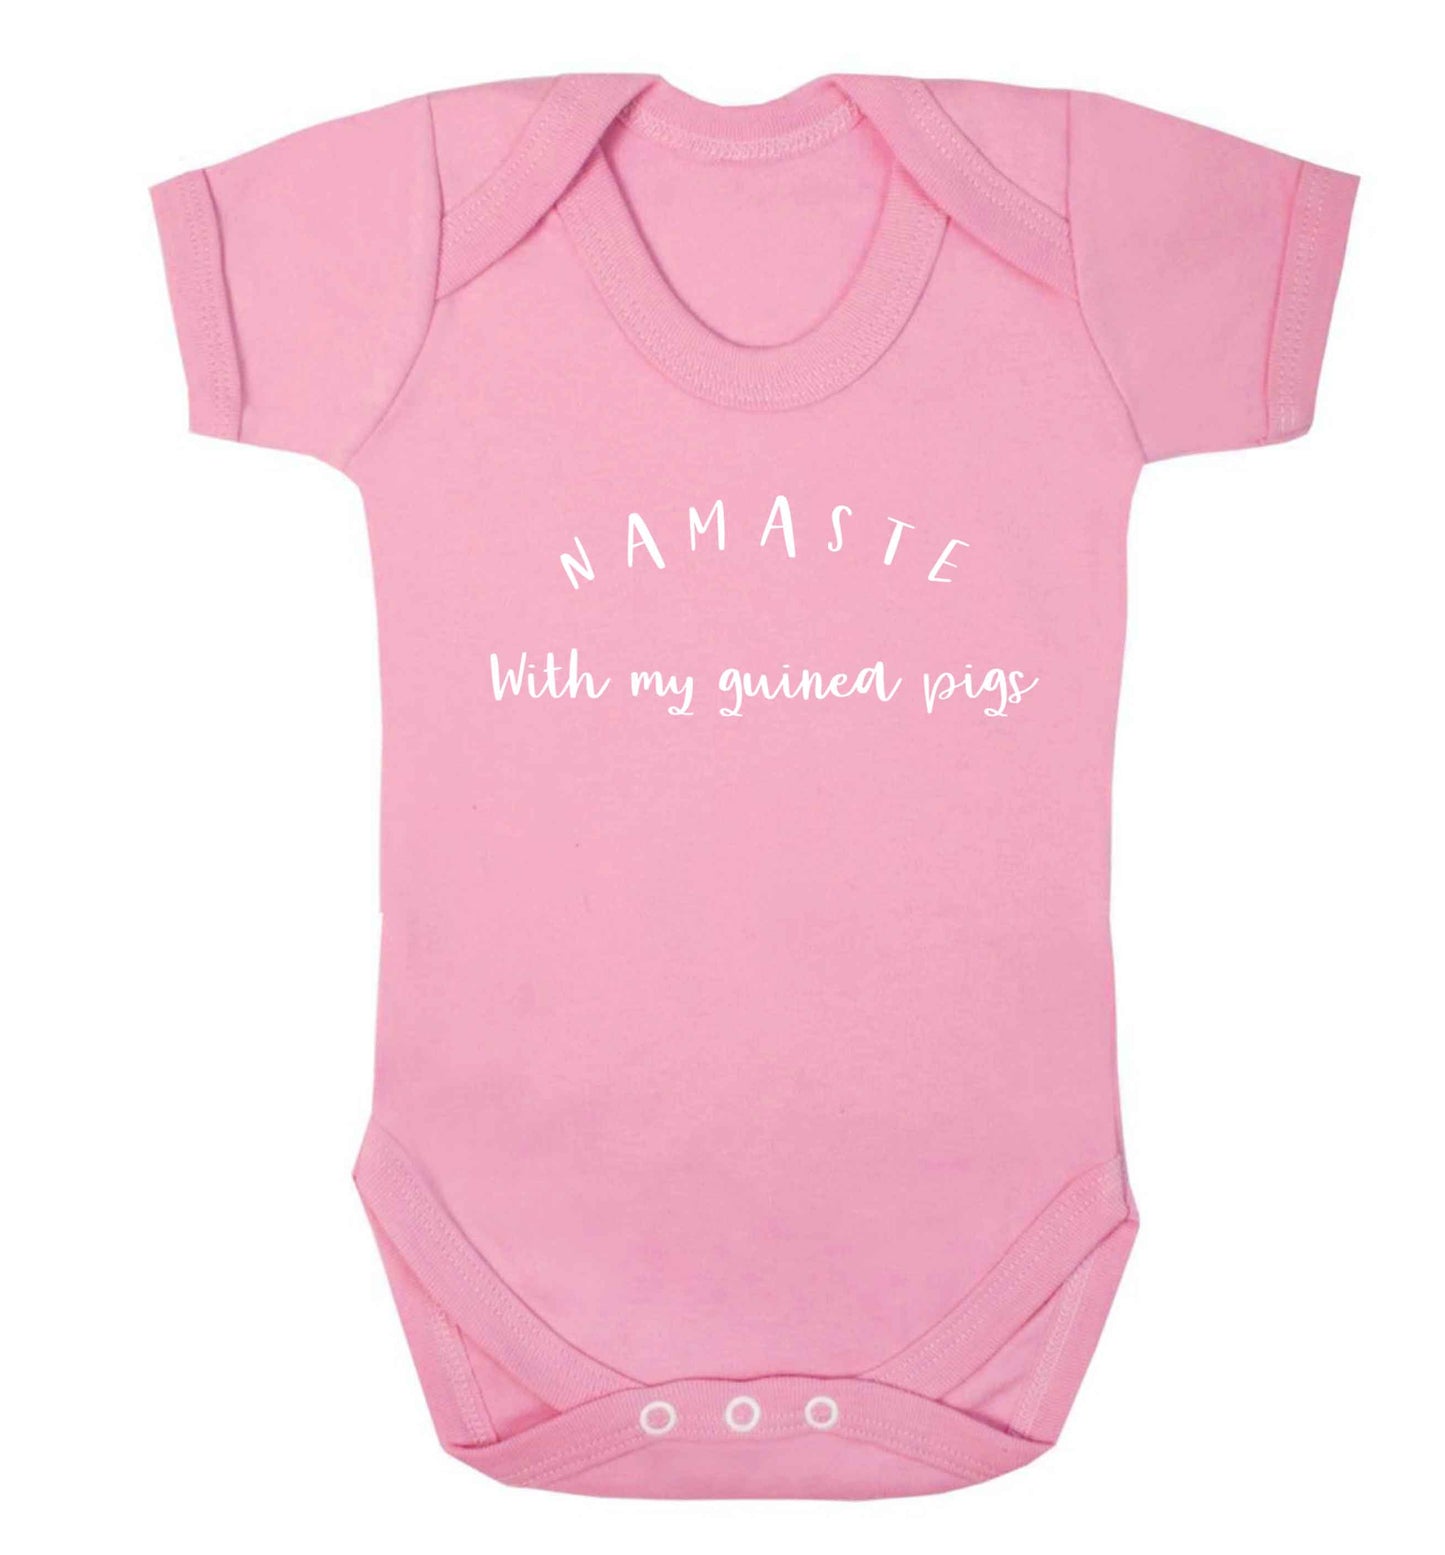 Namaste with my guinea pigs Baby Vest pale pink 18-24 months